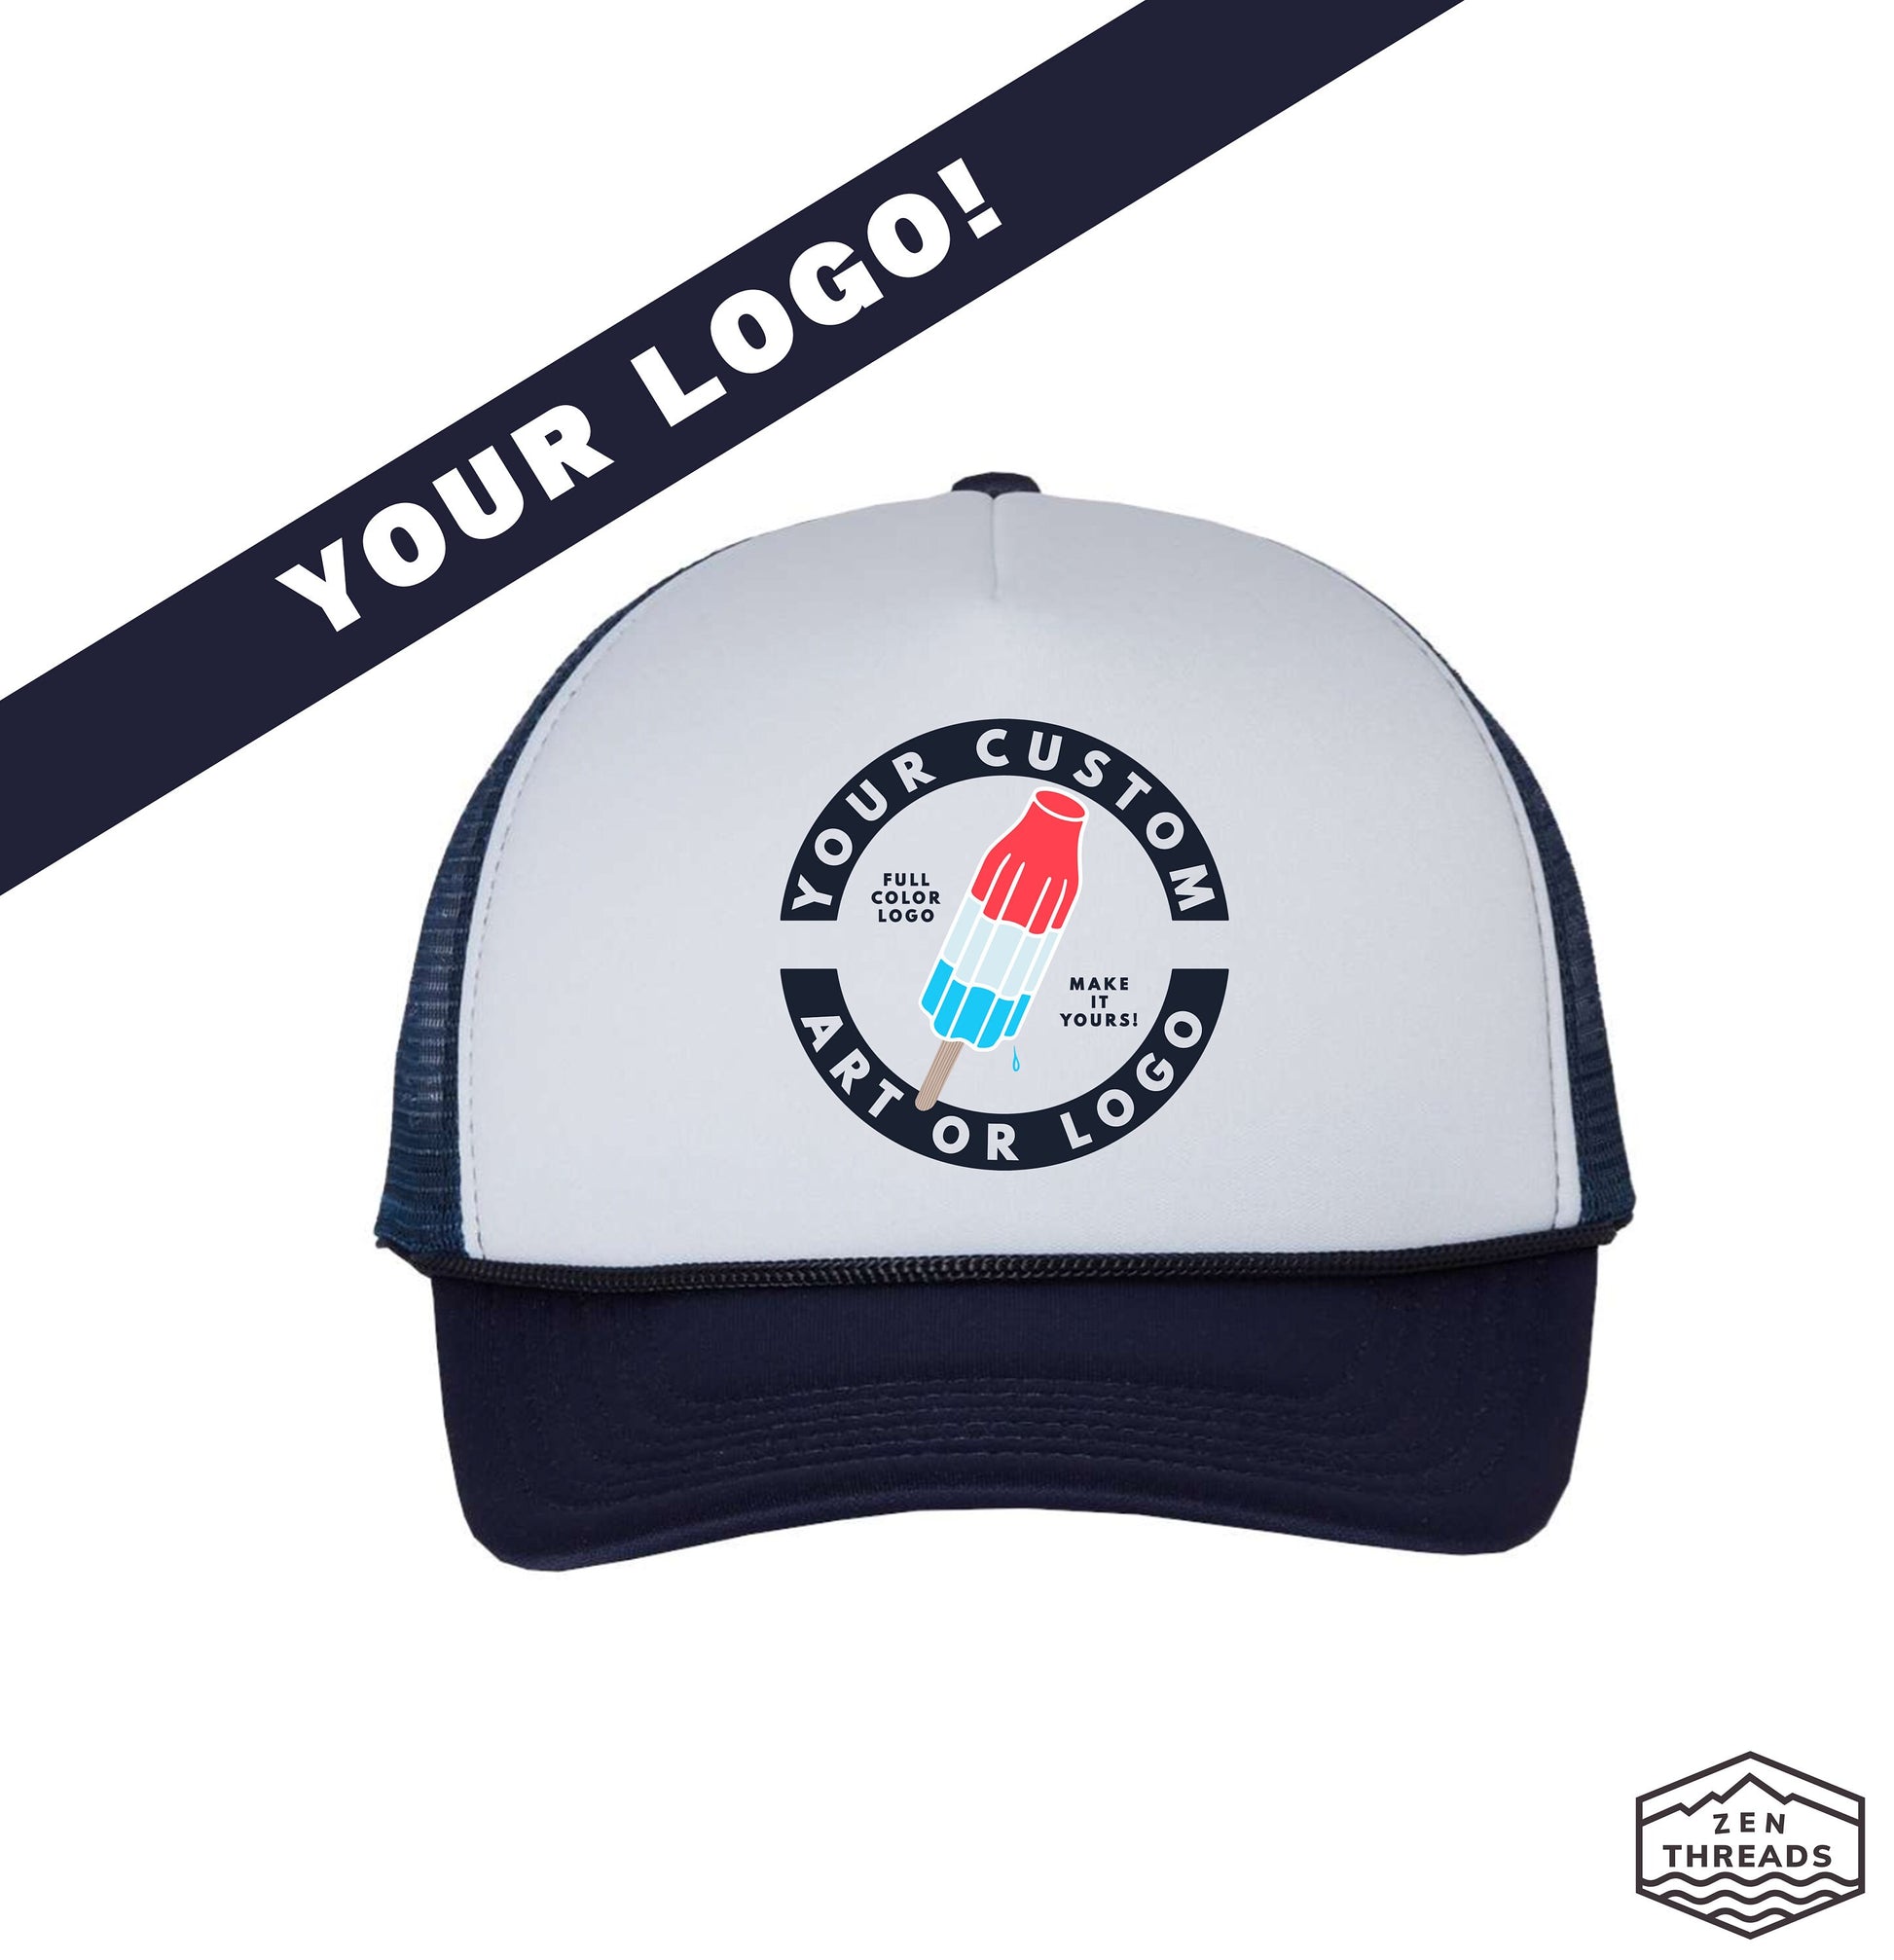 Custom Trucker Old school foam front mesh back unisex one size adjustable your logo printed full color team cap group matching bulk rate